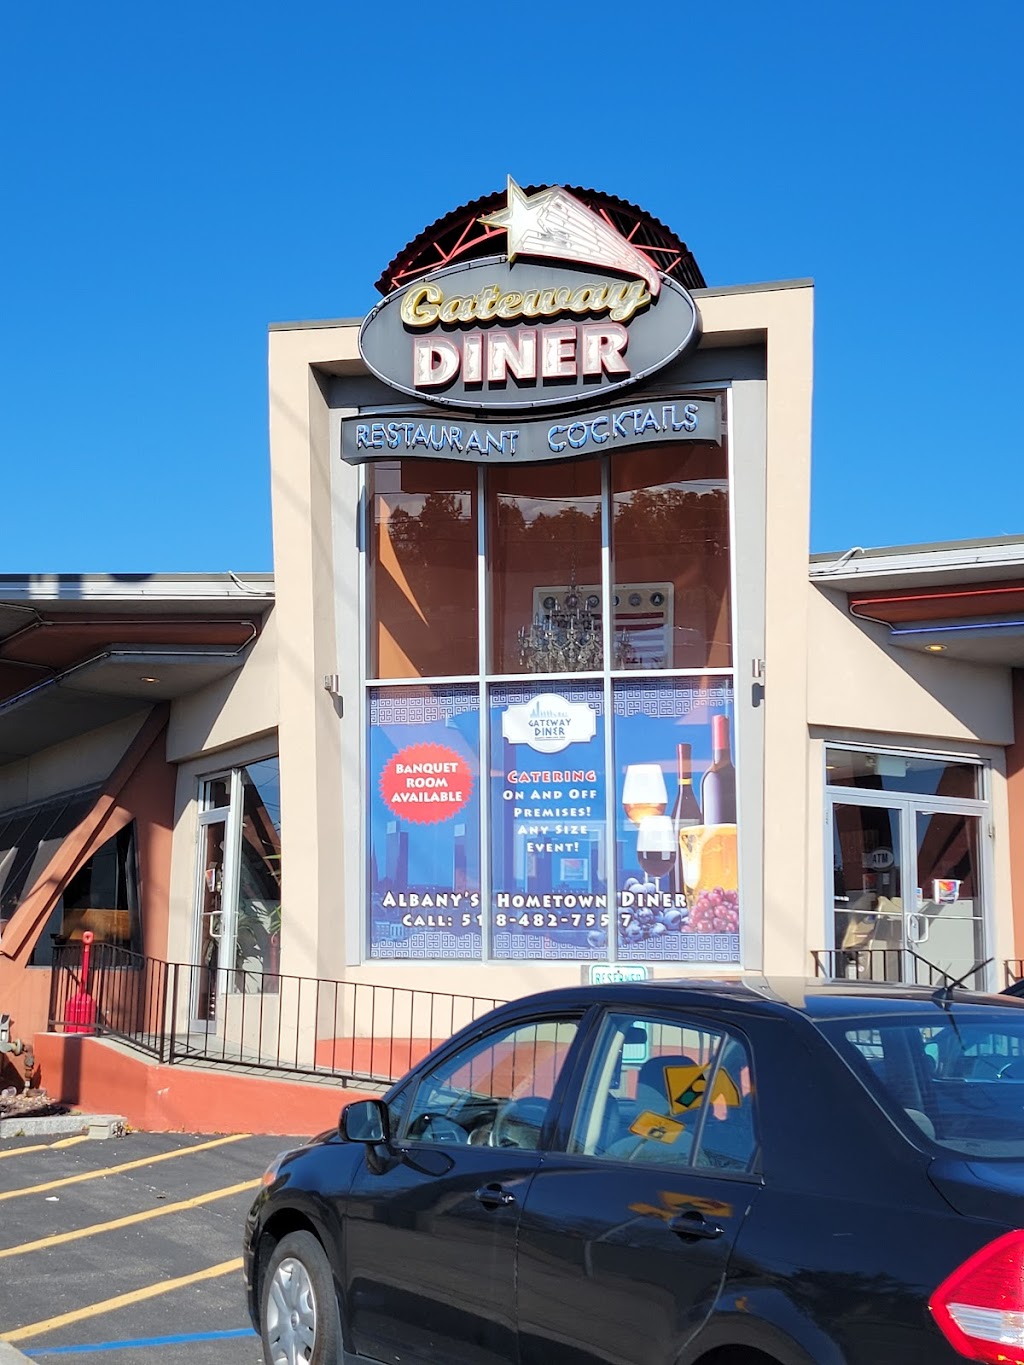 The Gateway Diner | 899 Central Ave, Albany, NY 12206 | Phone: (518) 482-7557